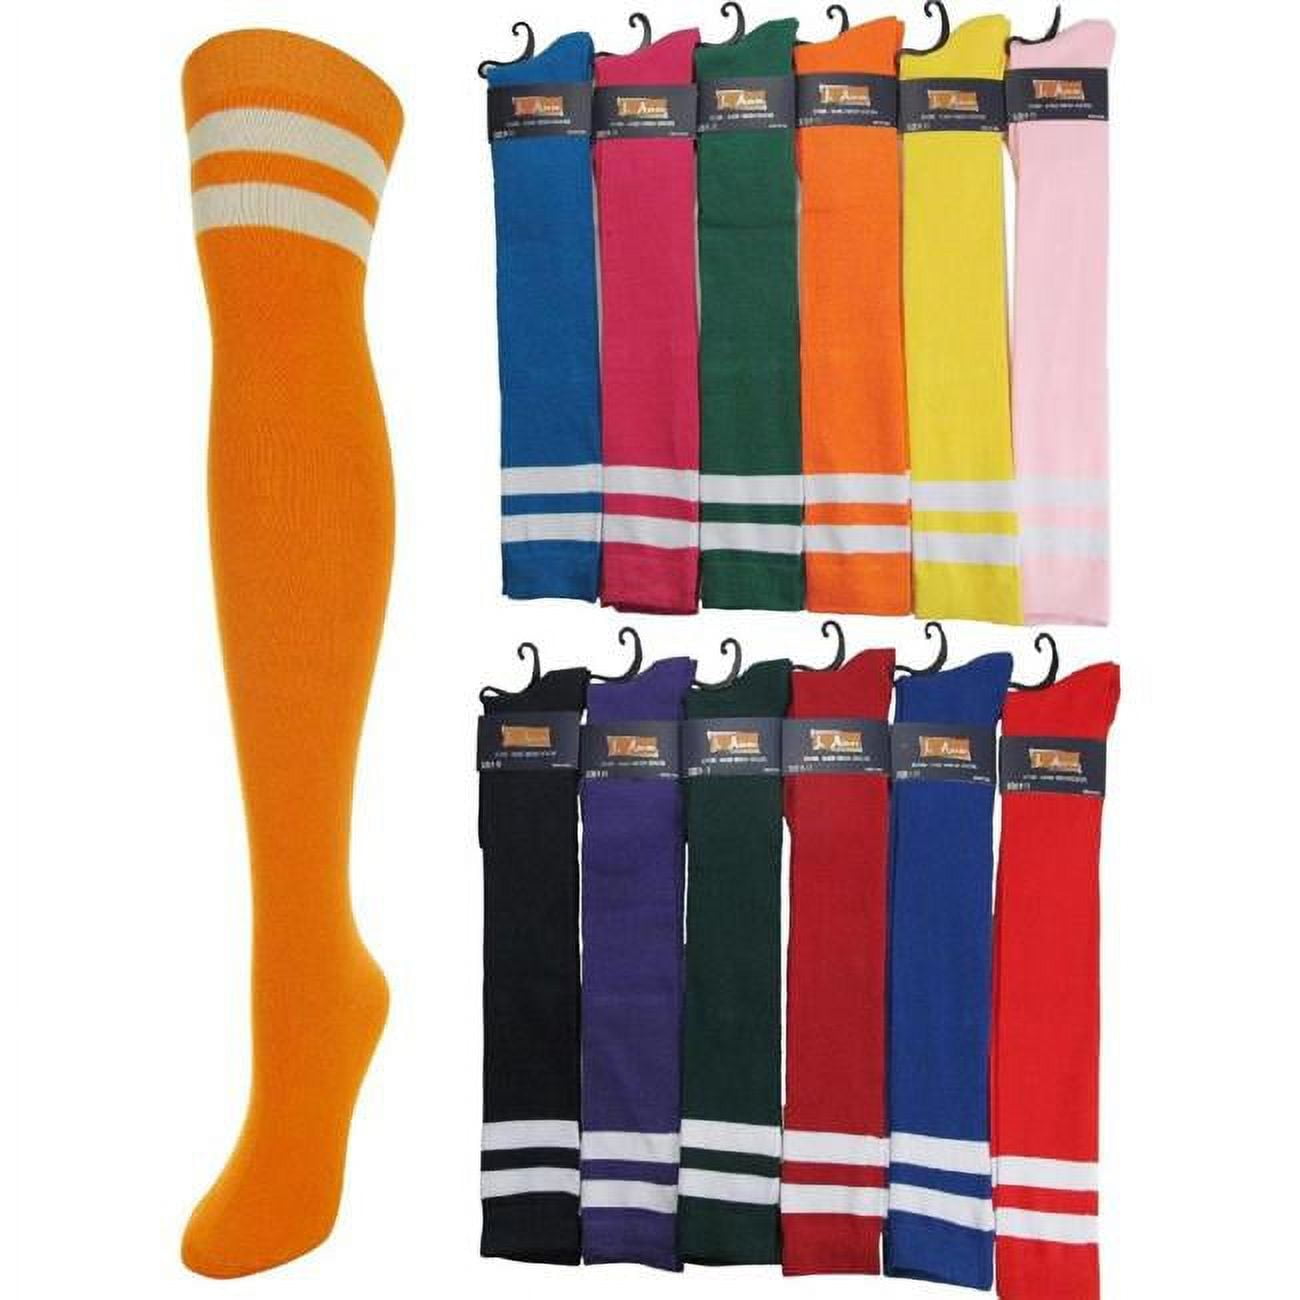 1867138 Size 9-11 Womens Over Knee High Socks, Assorted Color - Pack Of 36